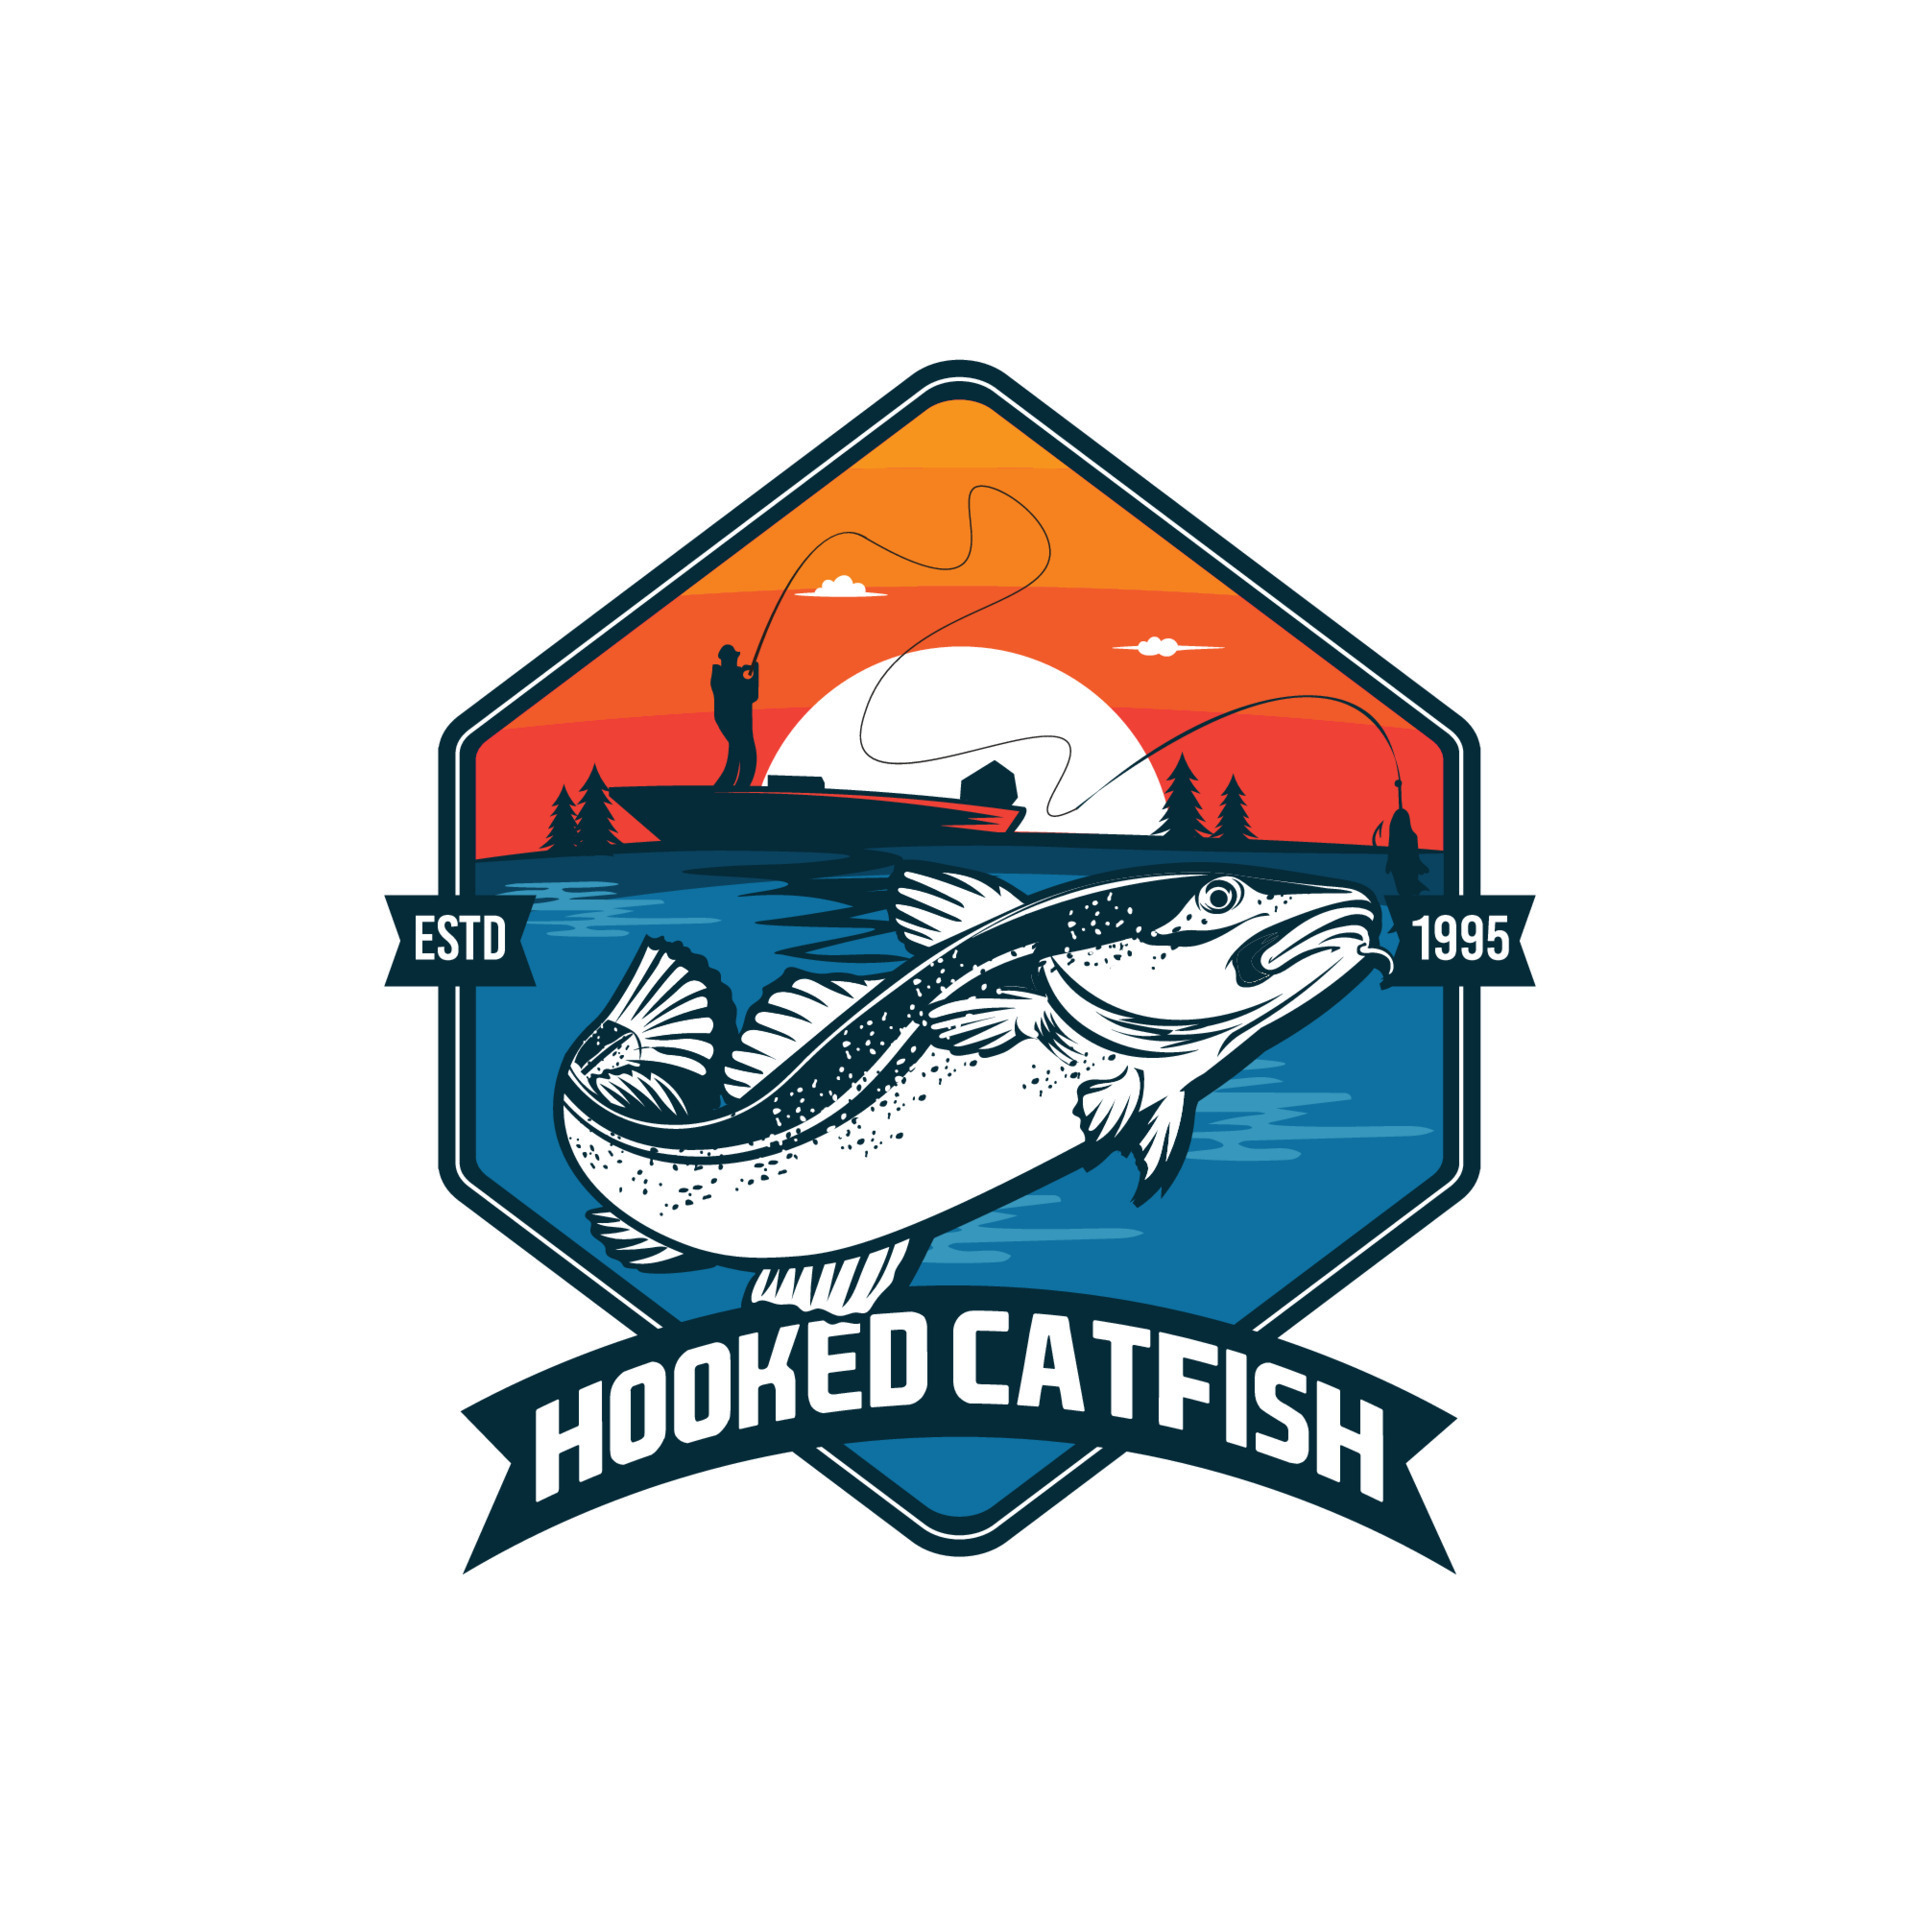 Catfish vector illustration in badge design style, perfect for